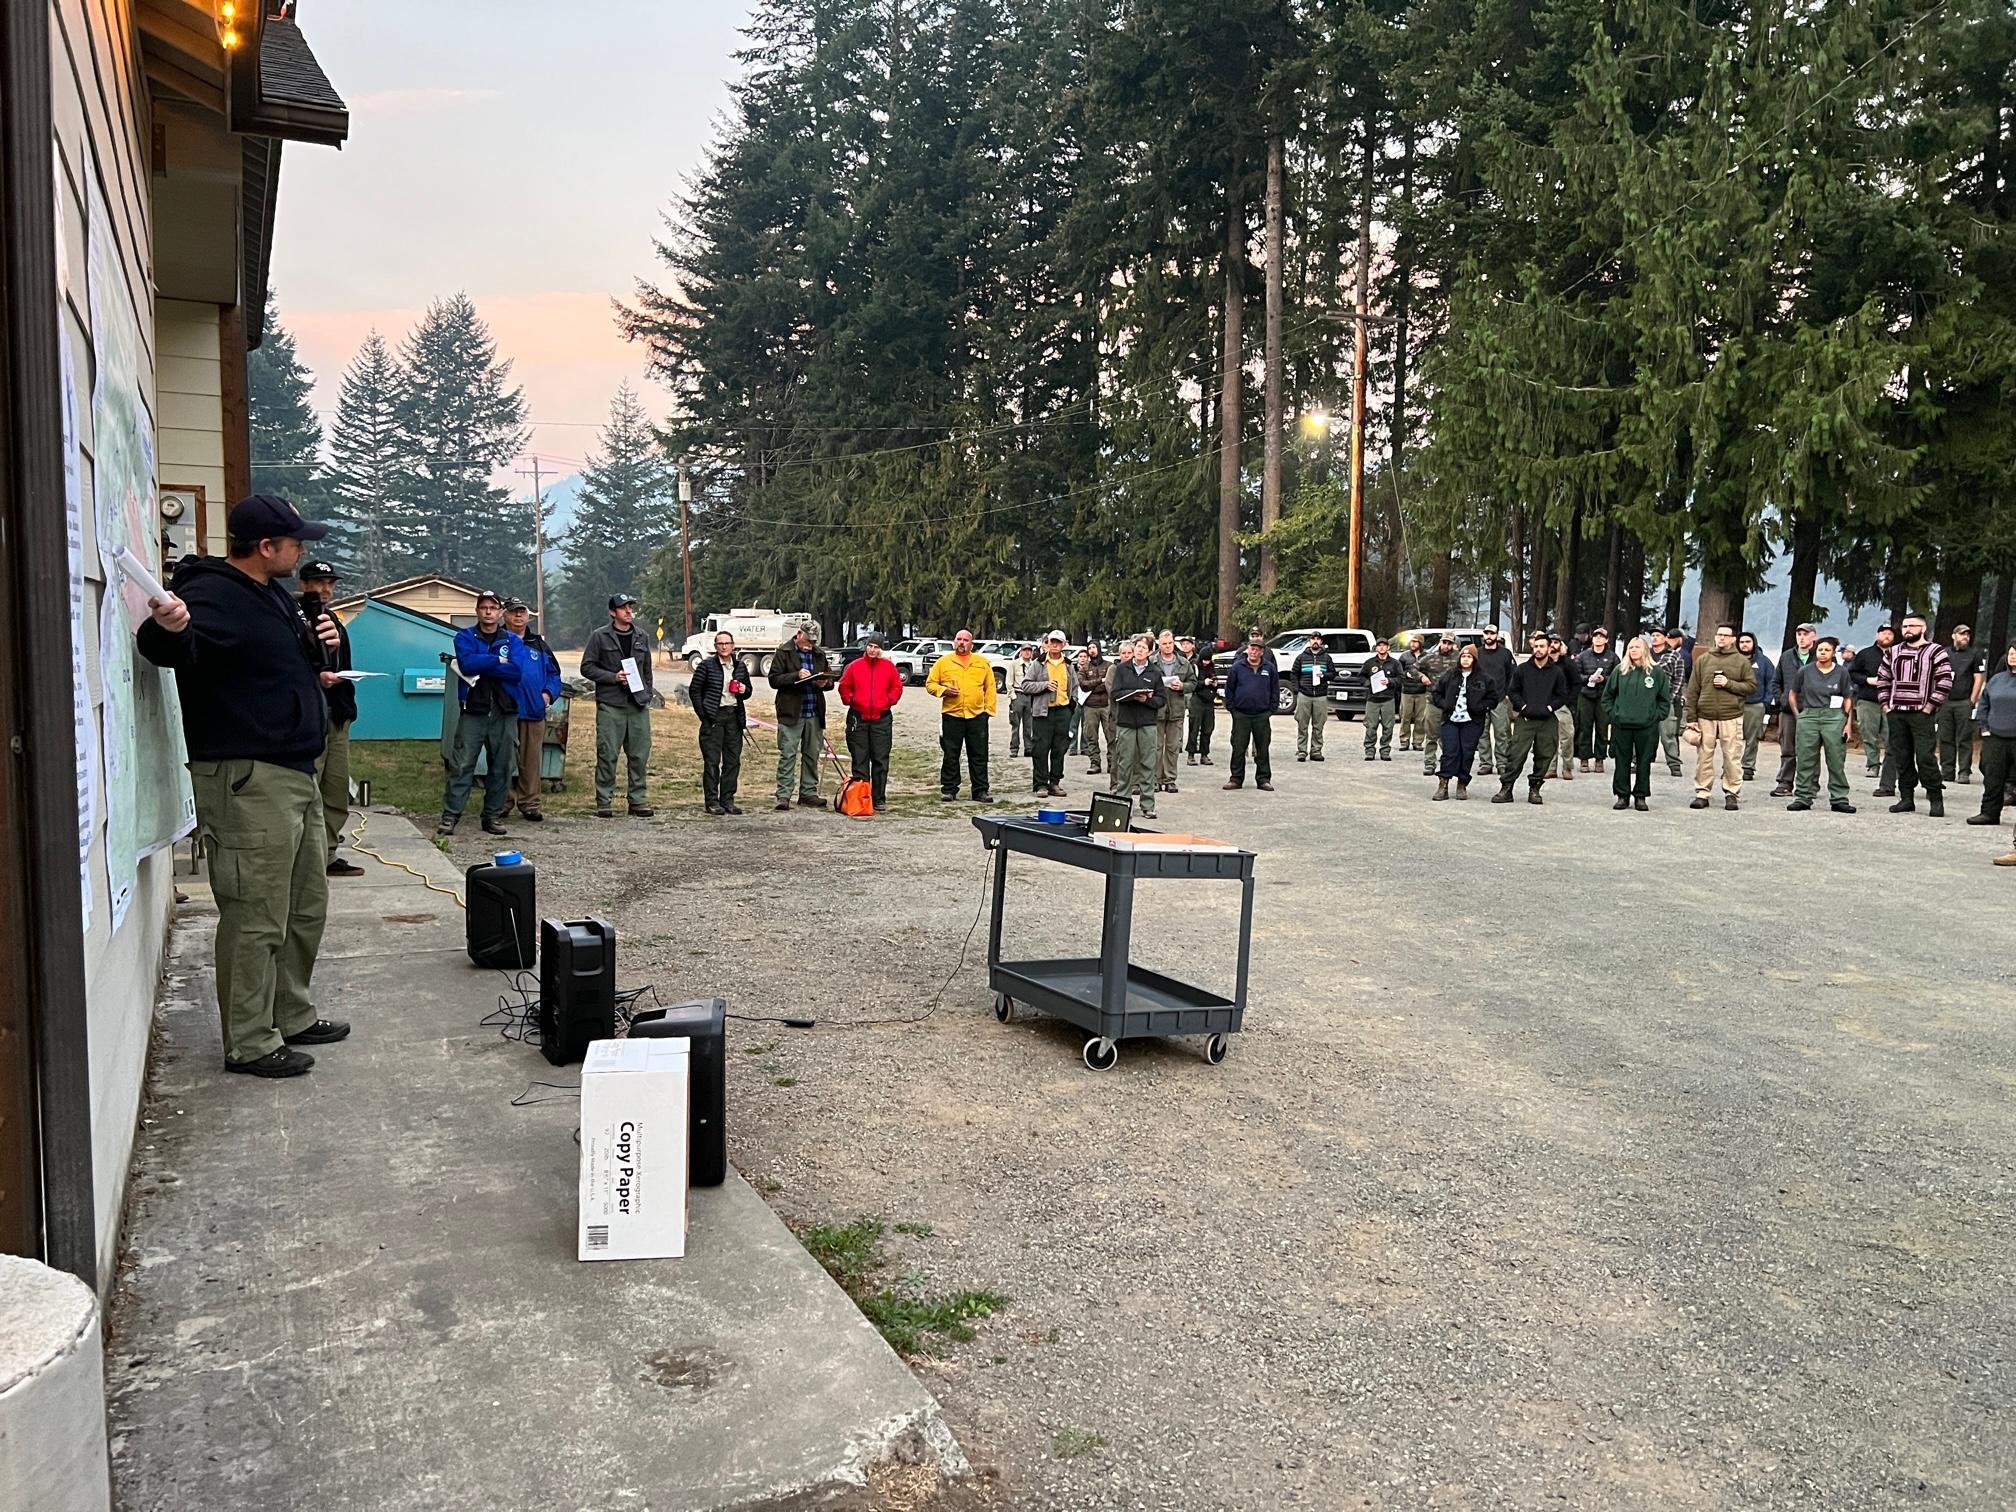 A group of people are standing in a large semi-circle, watching a man who is discussing the fire and pointing at a map on the side of the Packwood Community Hall.